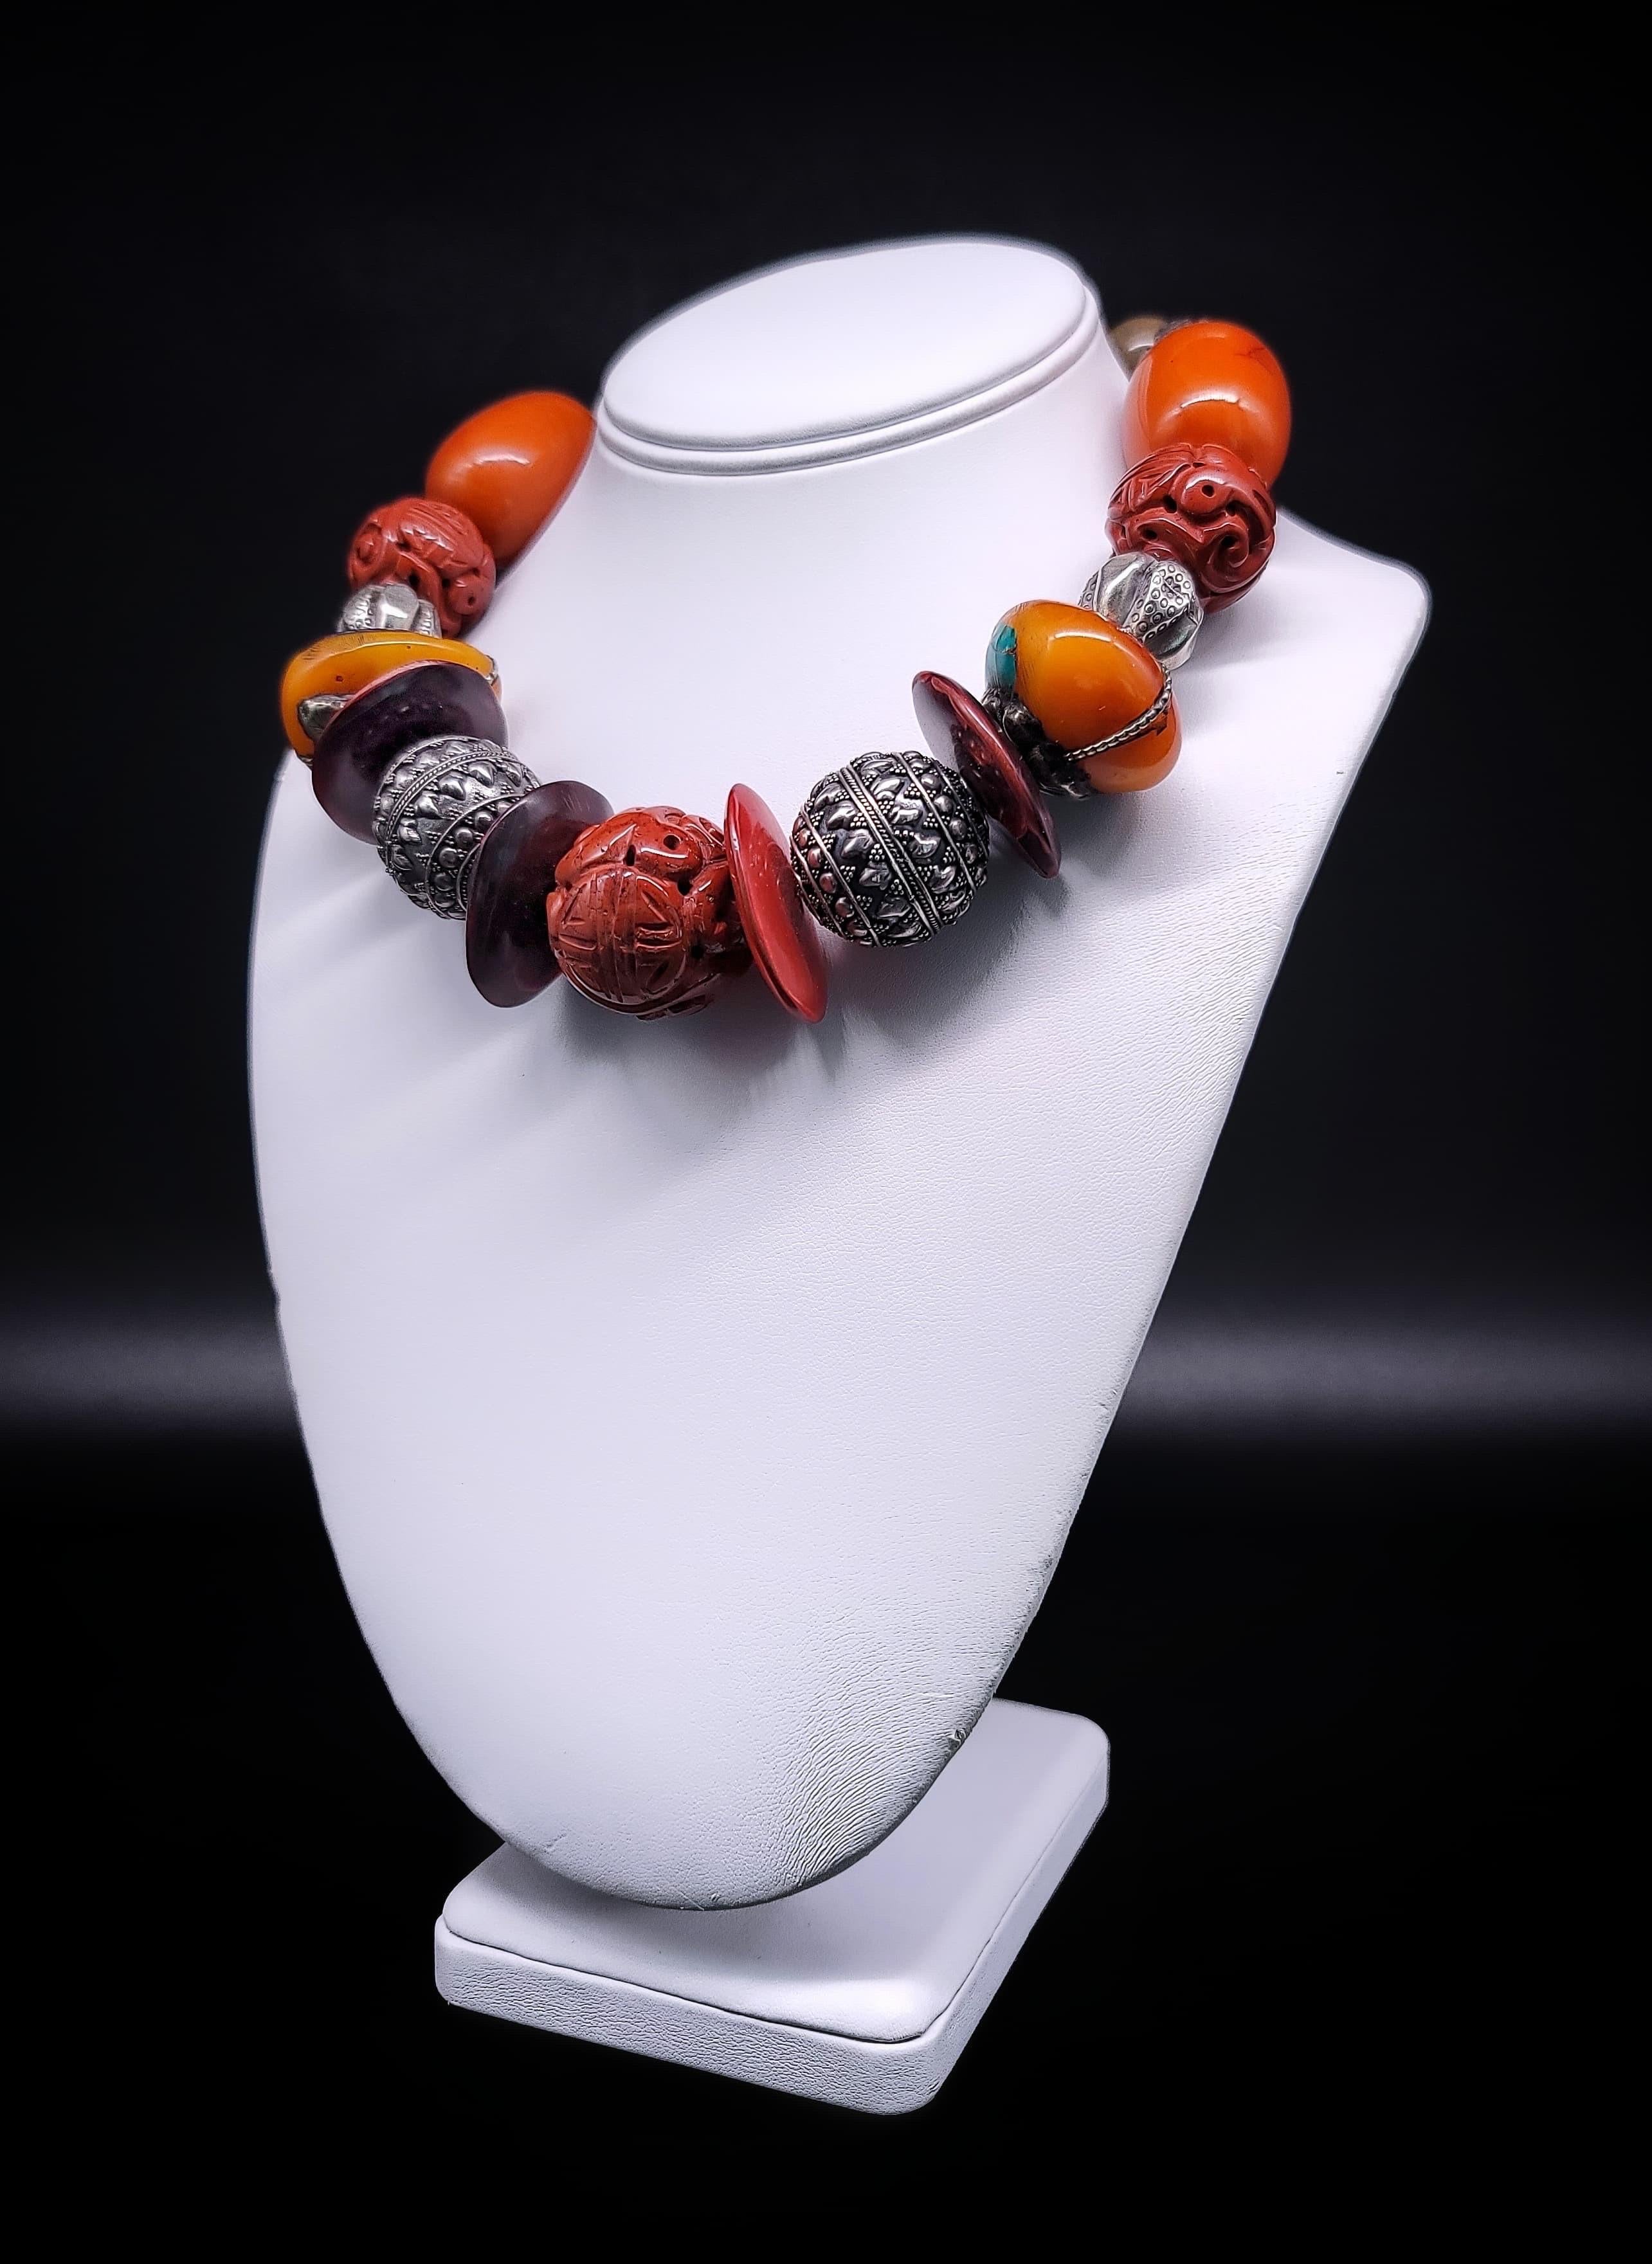 A.Jeschel Tibetan Amber necklace with Carved Ceramic. 7